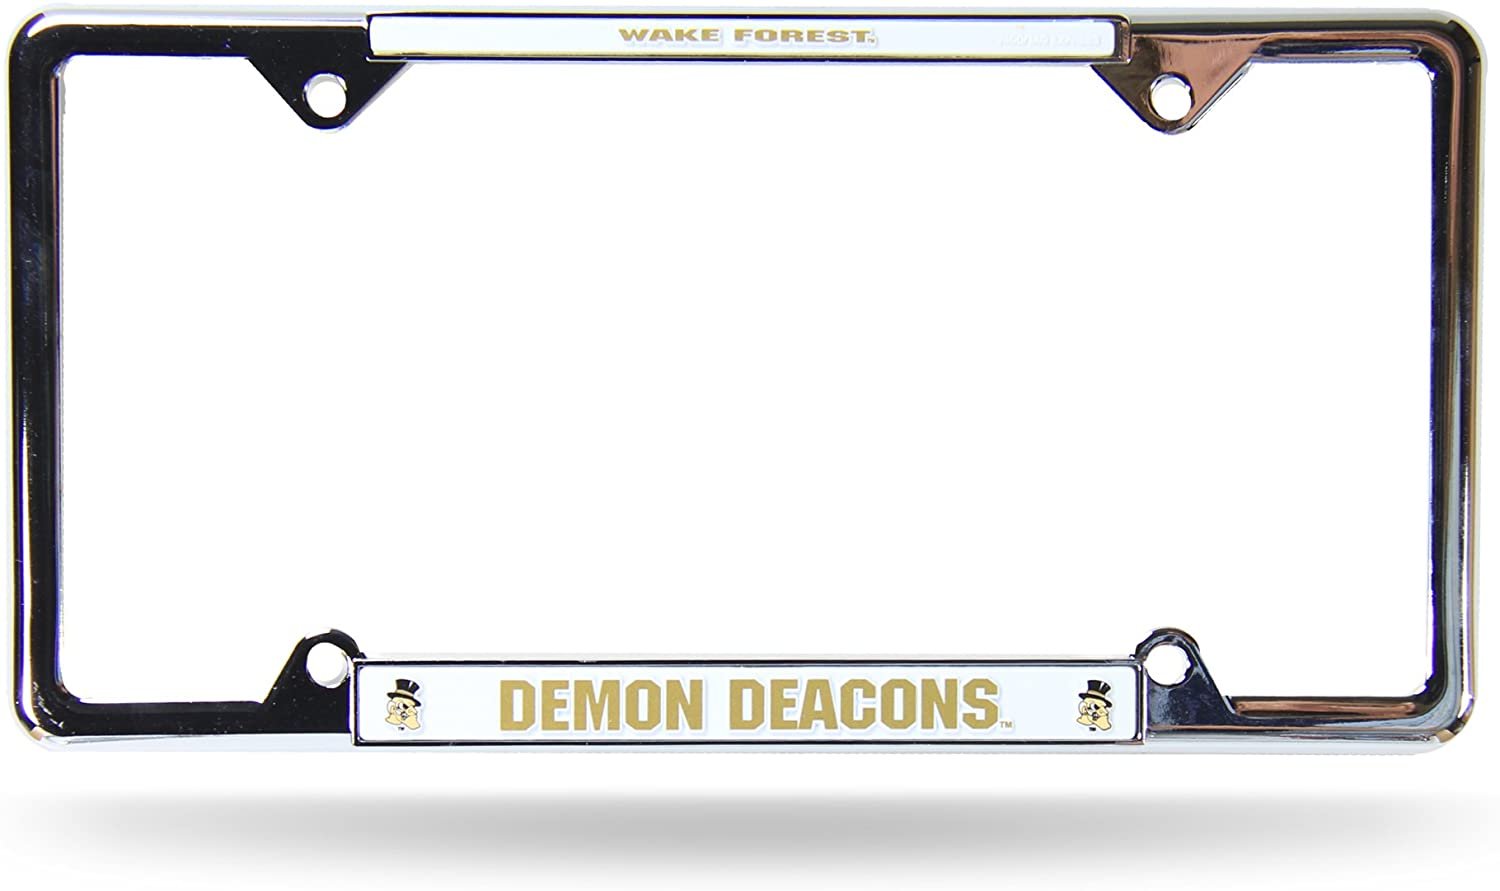 Wake Forest University Demon Deacons Metal License Plate Frame Chrome Tag Cover, EZ View Design, 12x6 Inch